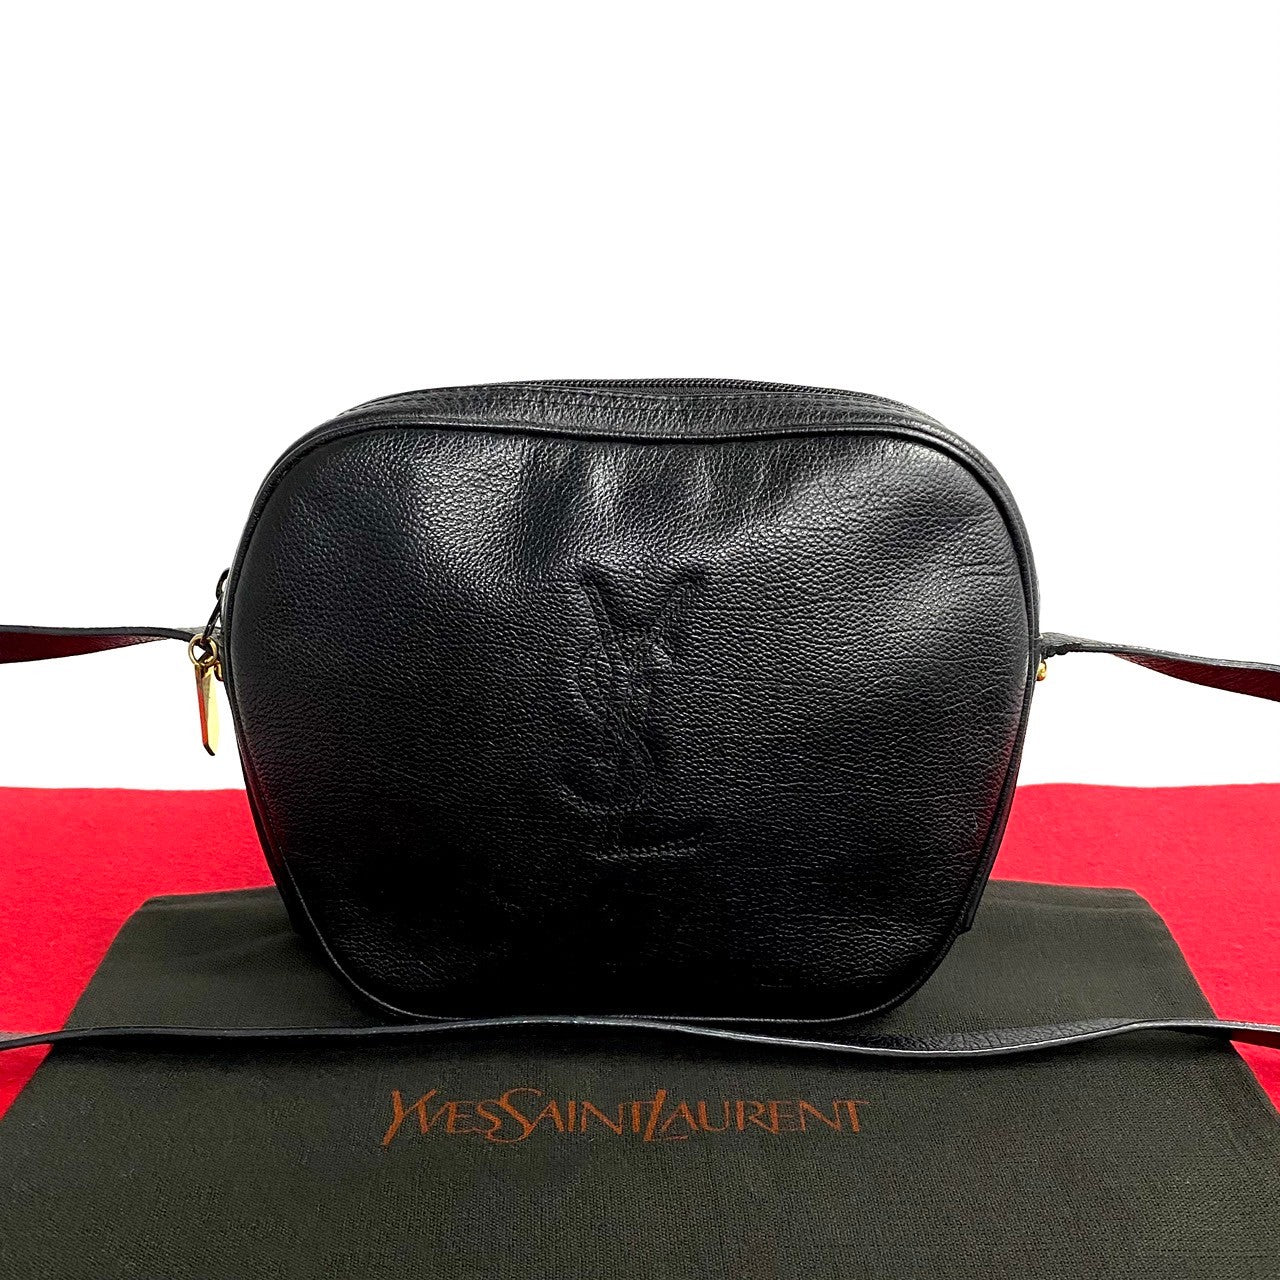 Yves Saint Laurent Leather Logo Camera Bag Leather Crossbody Bag in Good condition